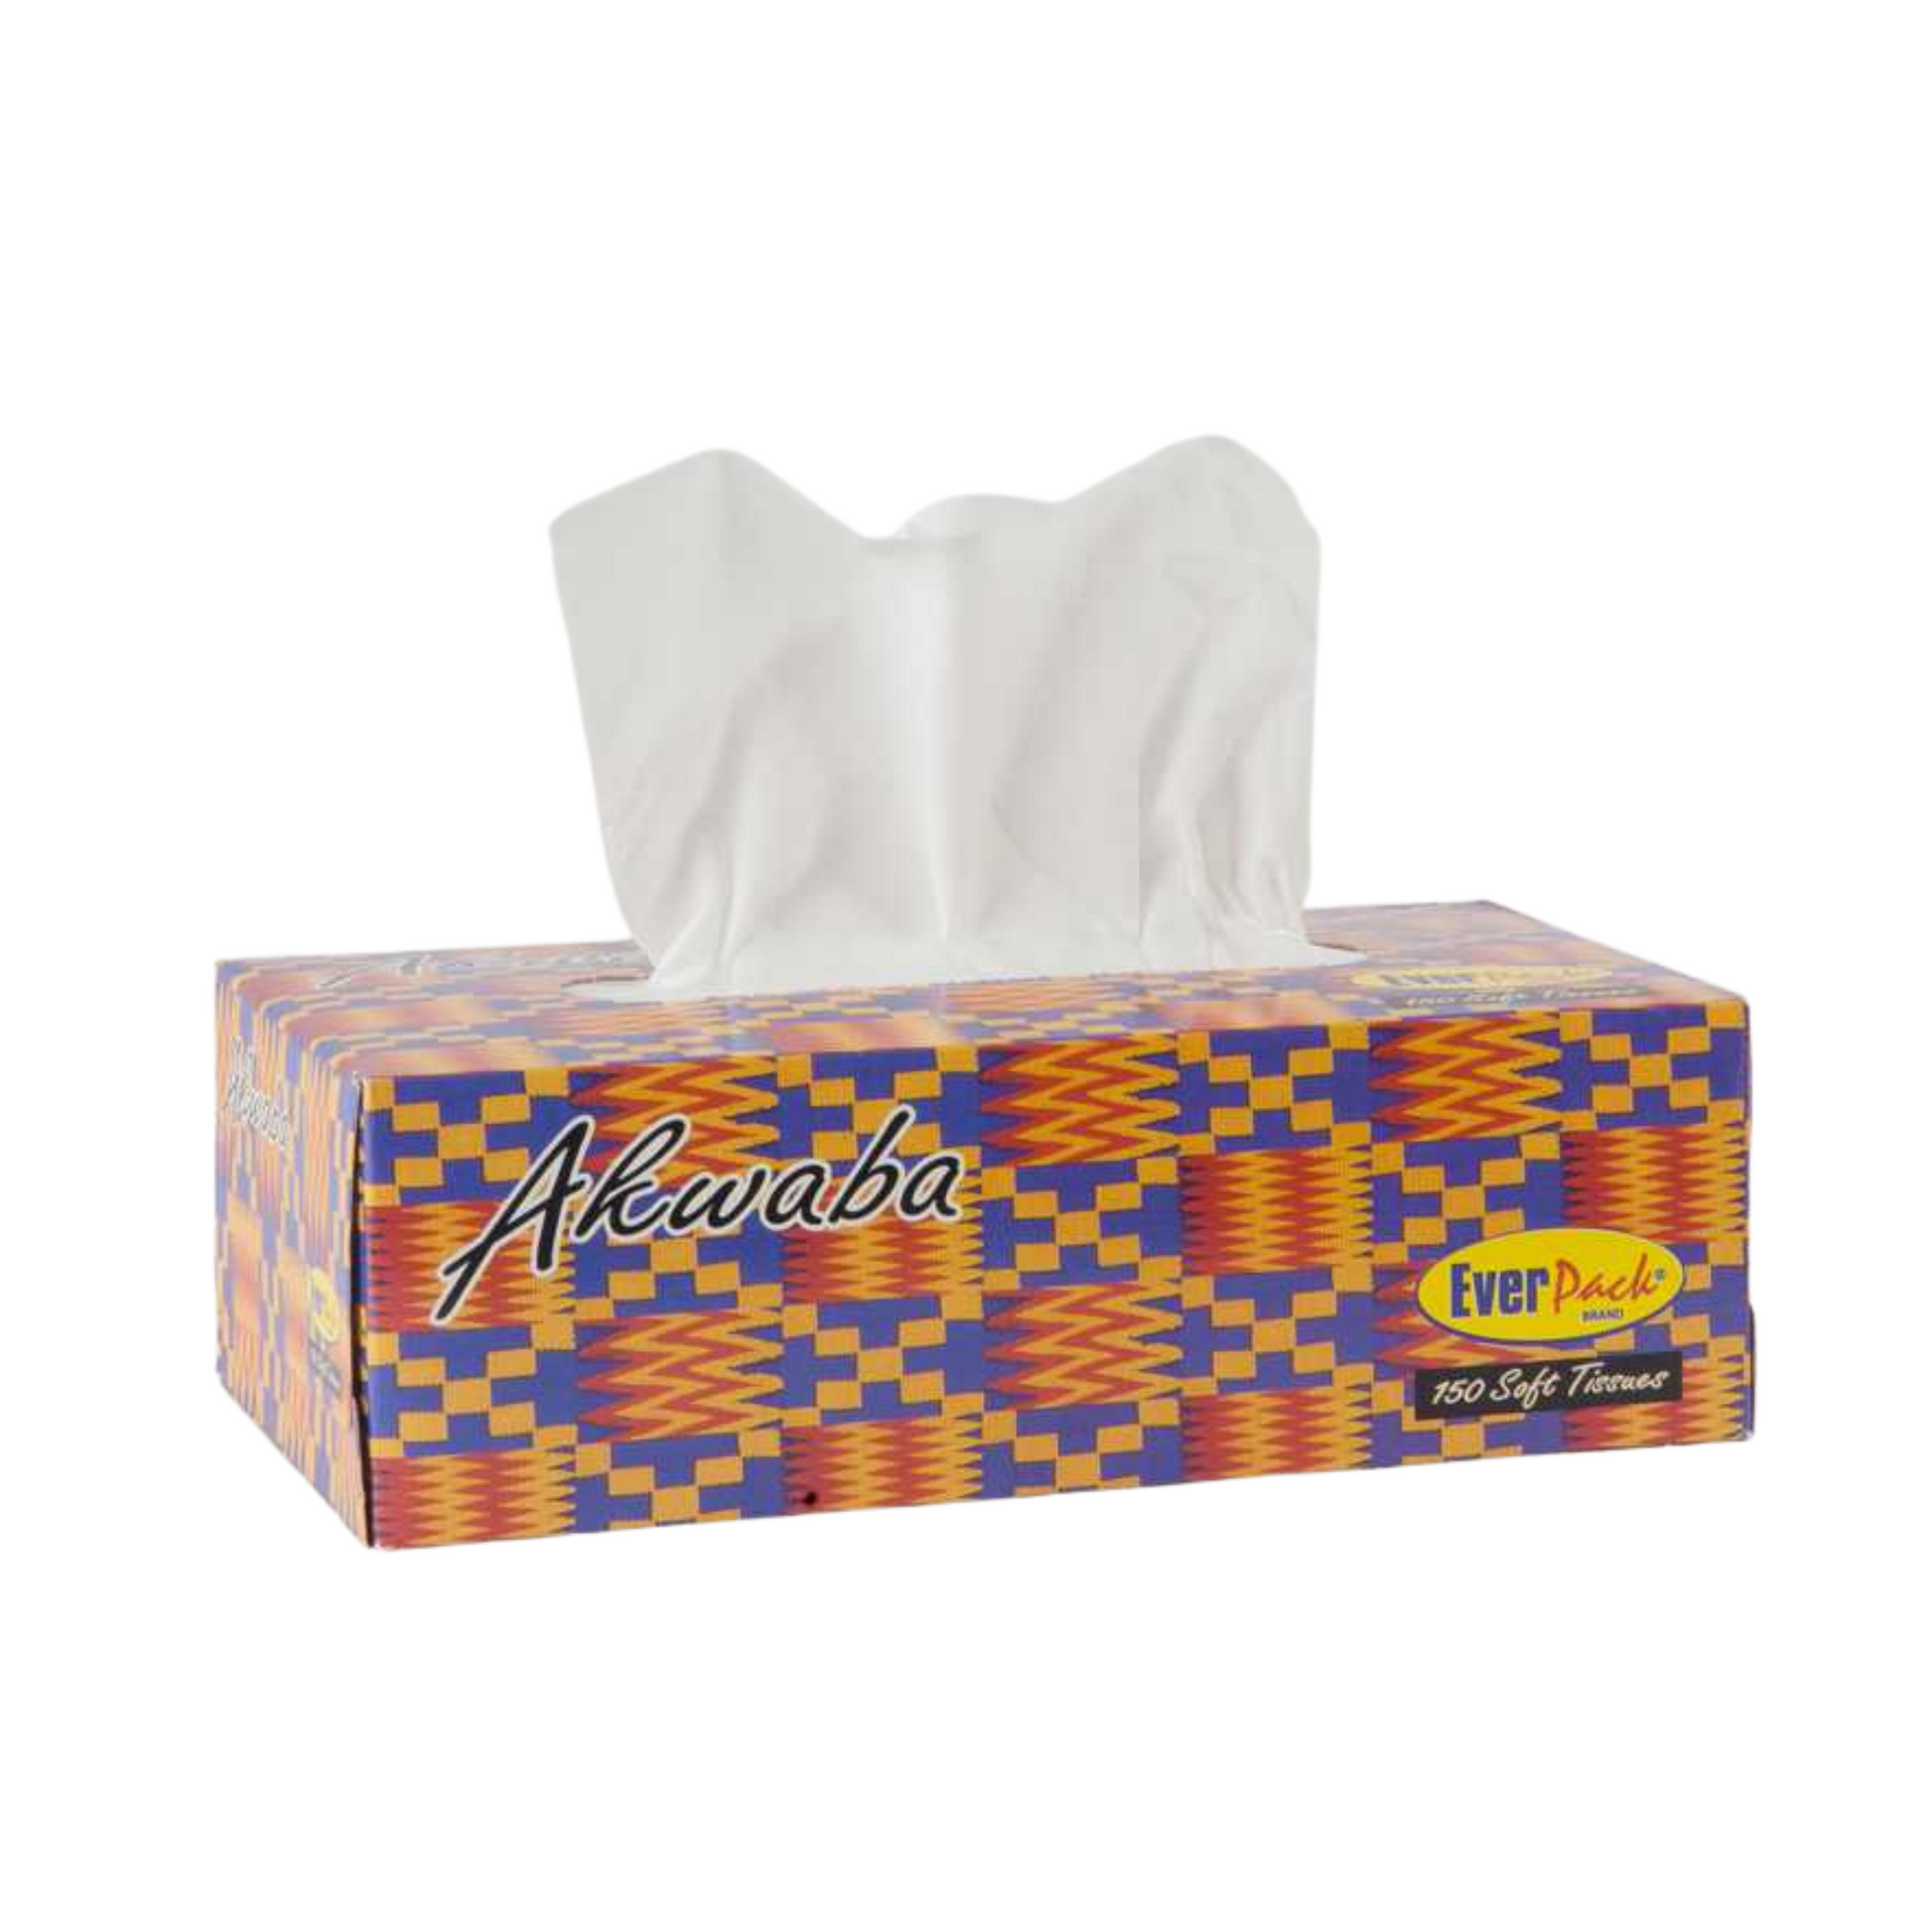 a box of everpack akwaba tissue